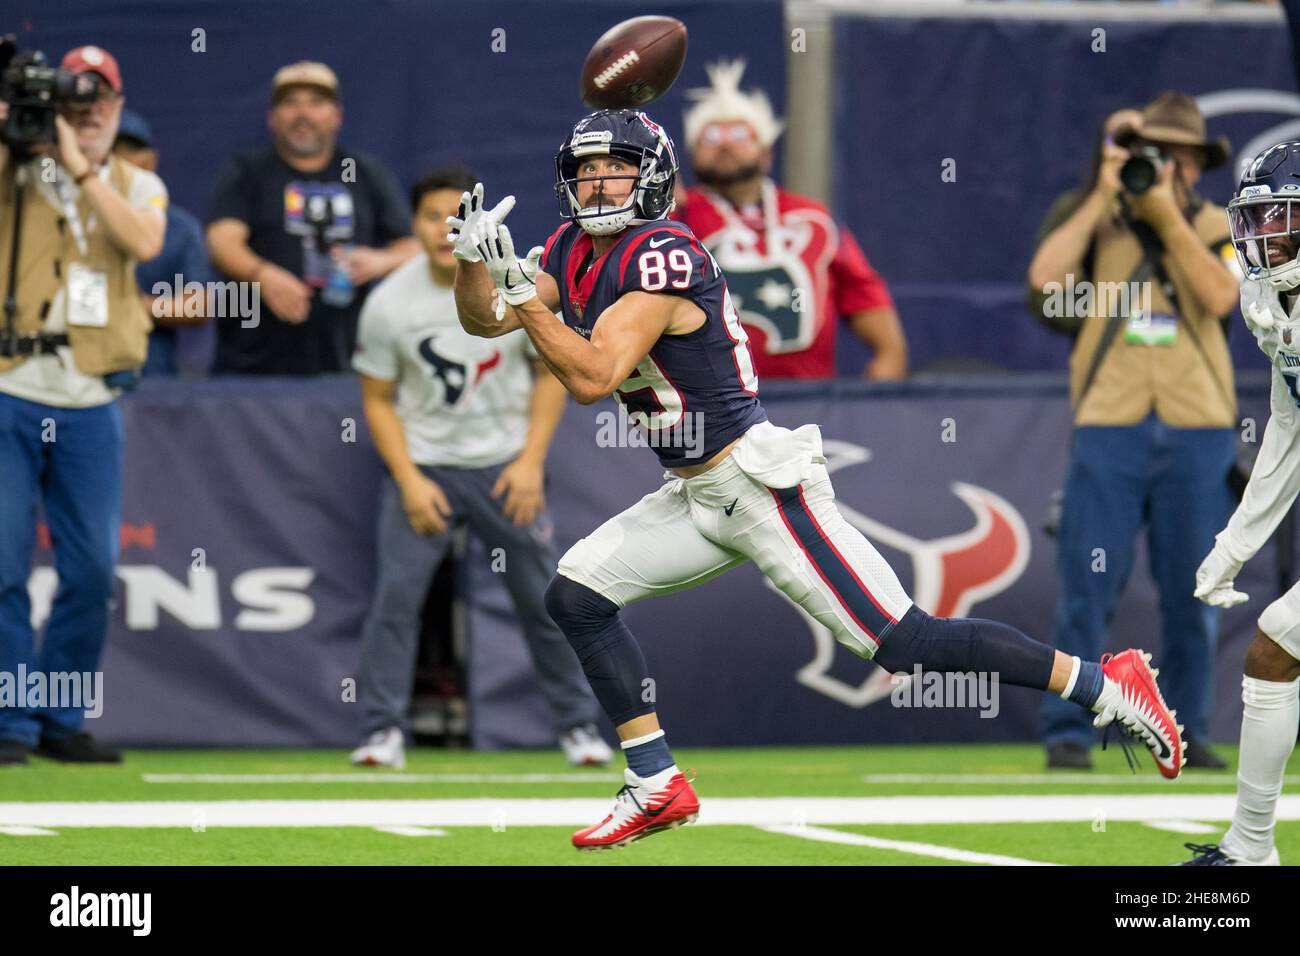 Danny amendola hi-res stock photography and images - Alamy